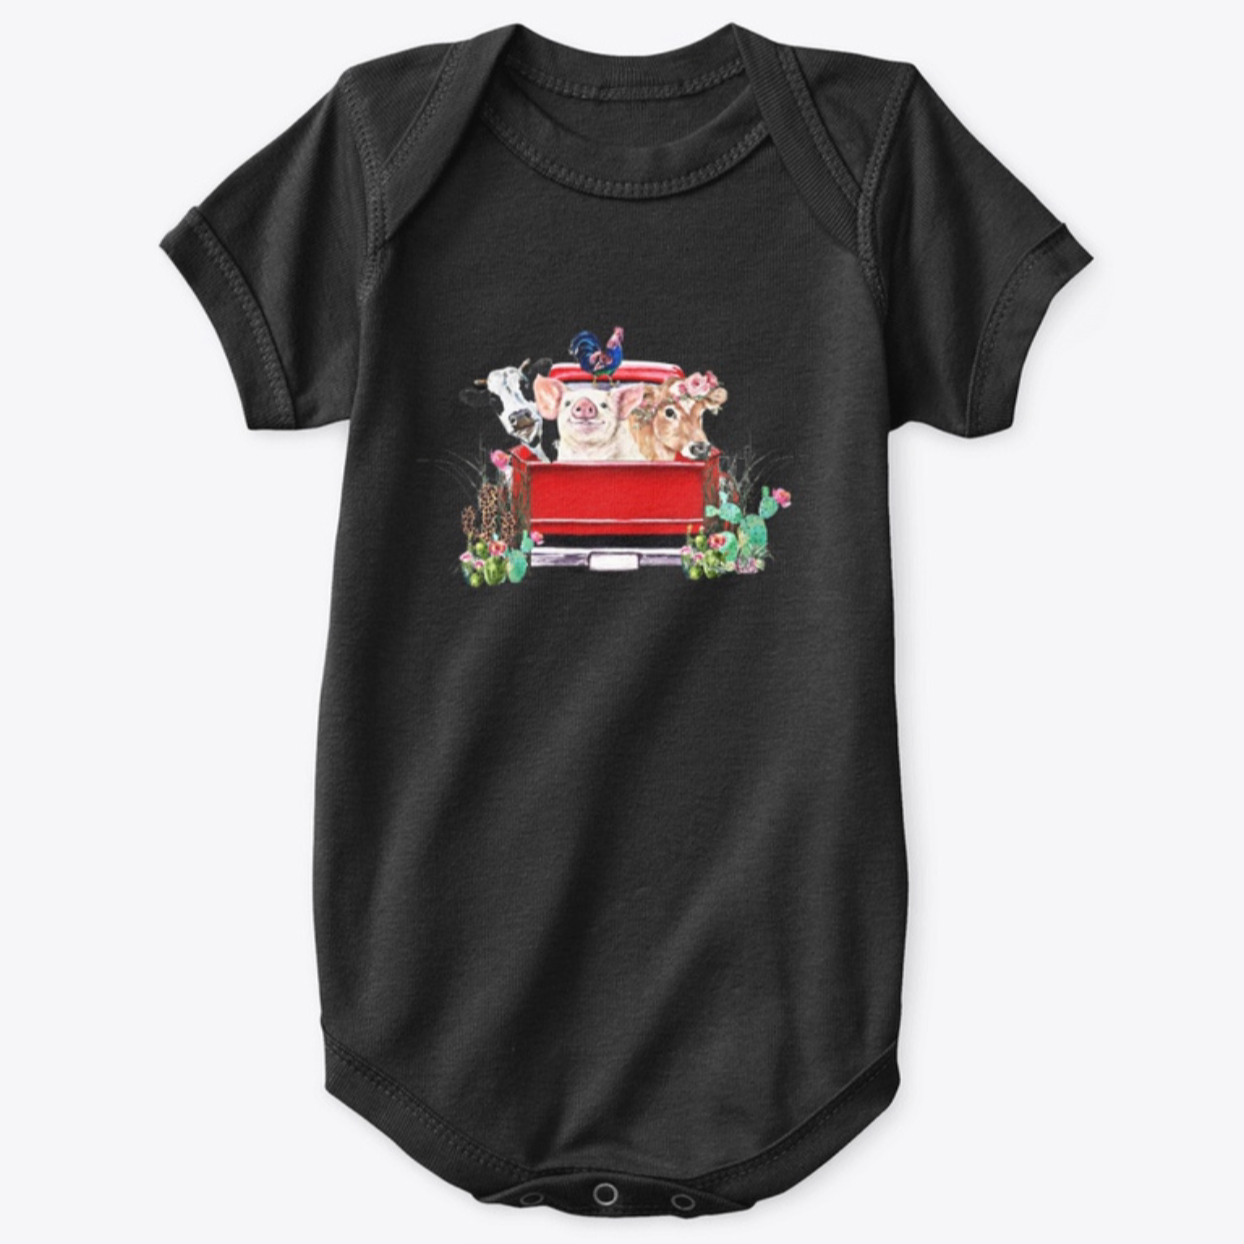 AAS Supporter Infant Onesie